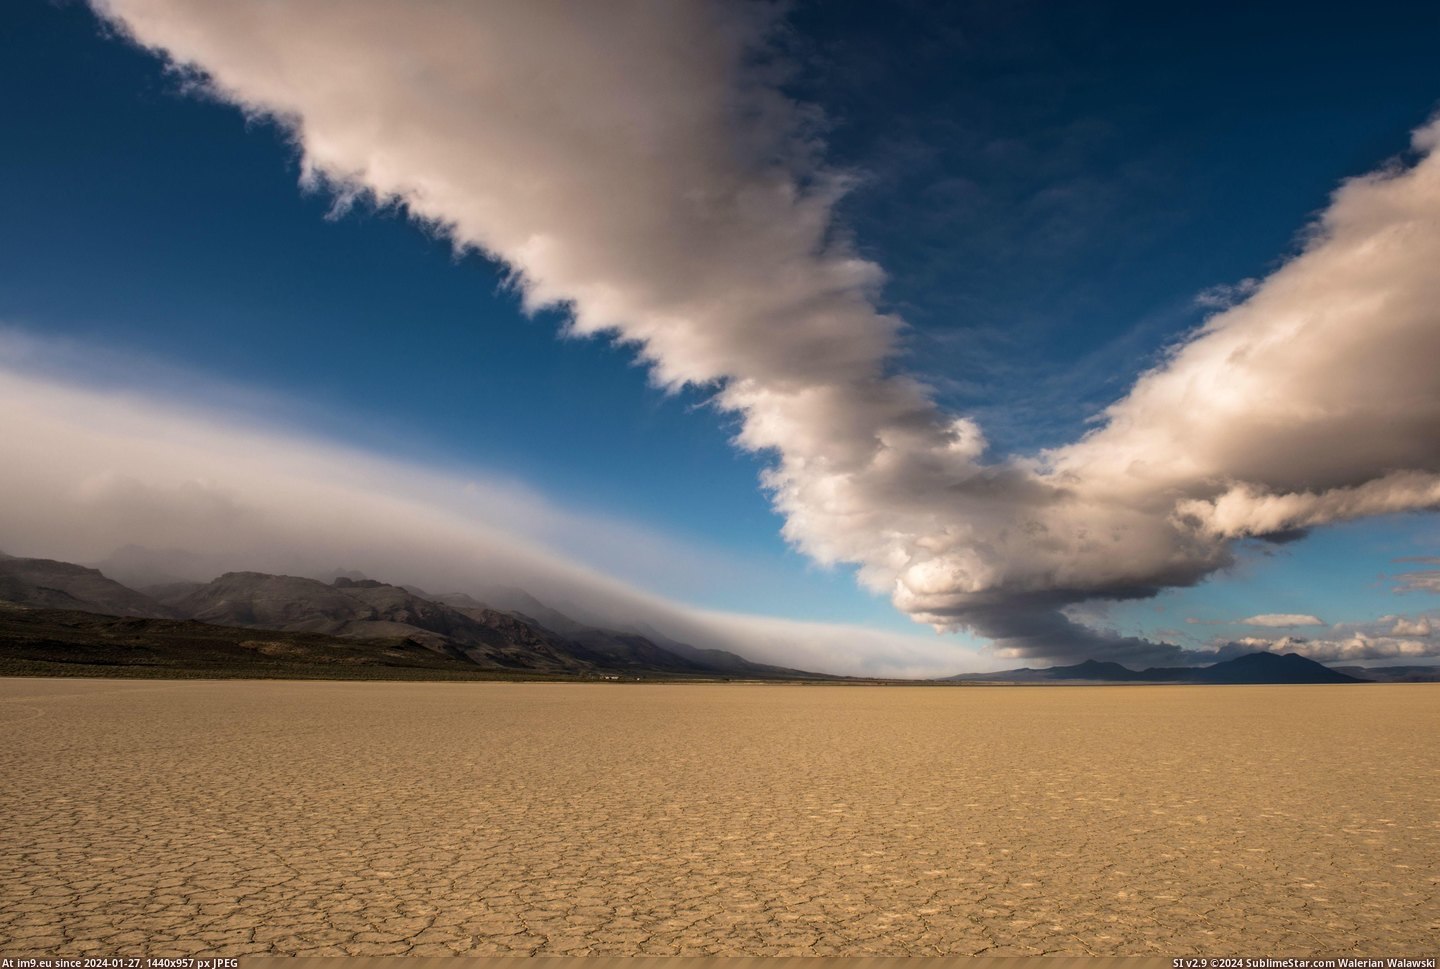 #Massive #Sky #Desert #Carried #Wind #Tunnels #Clouds #Incredible #Shape [Earthporn] Massive wind tunnels carried these clouds in an incredible 'V' shape through the sky in the Alvord Desert, OR  [4416 Pic. (Image of album My r/EARTHPORN favs))